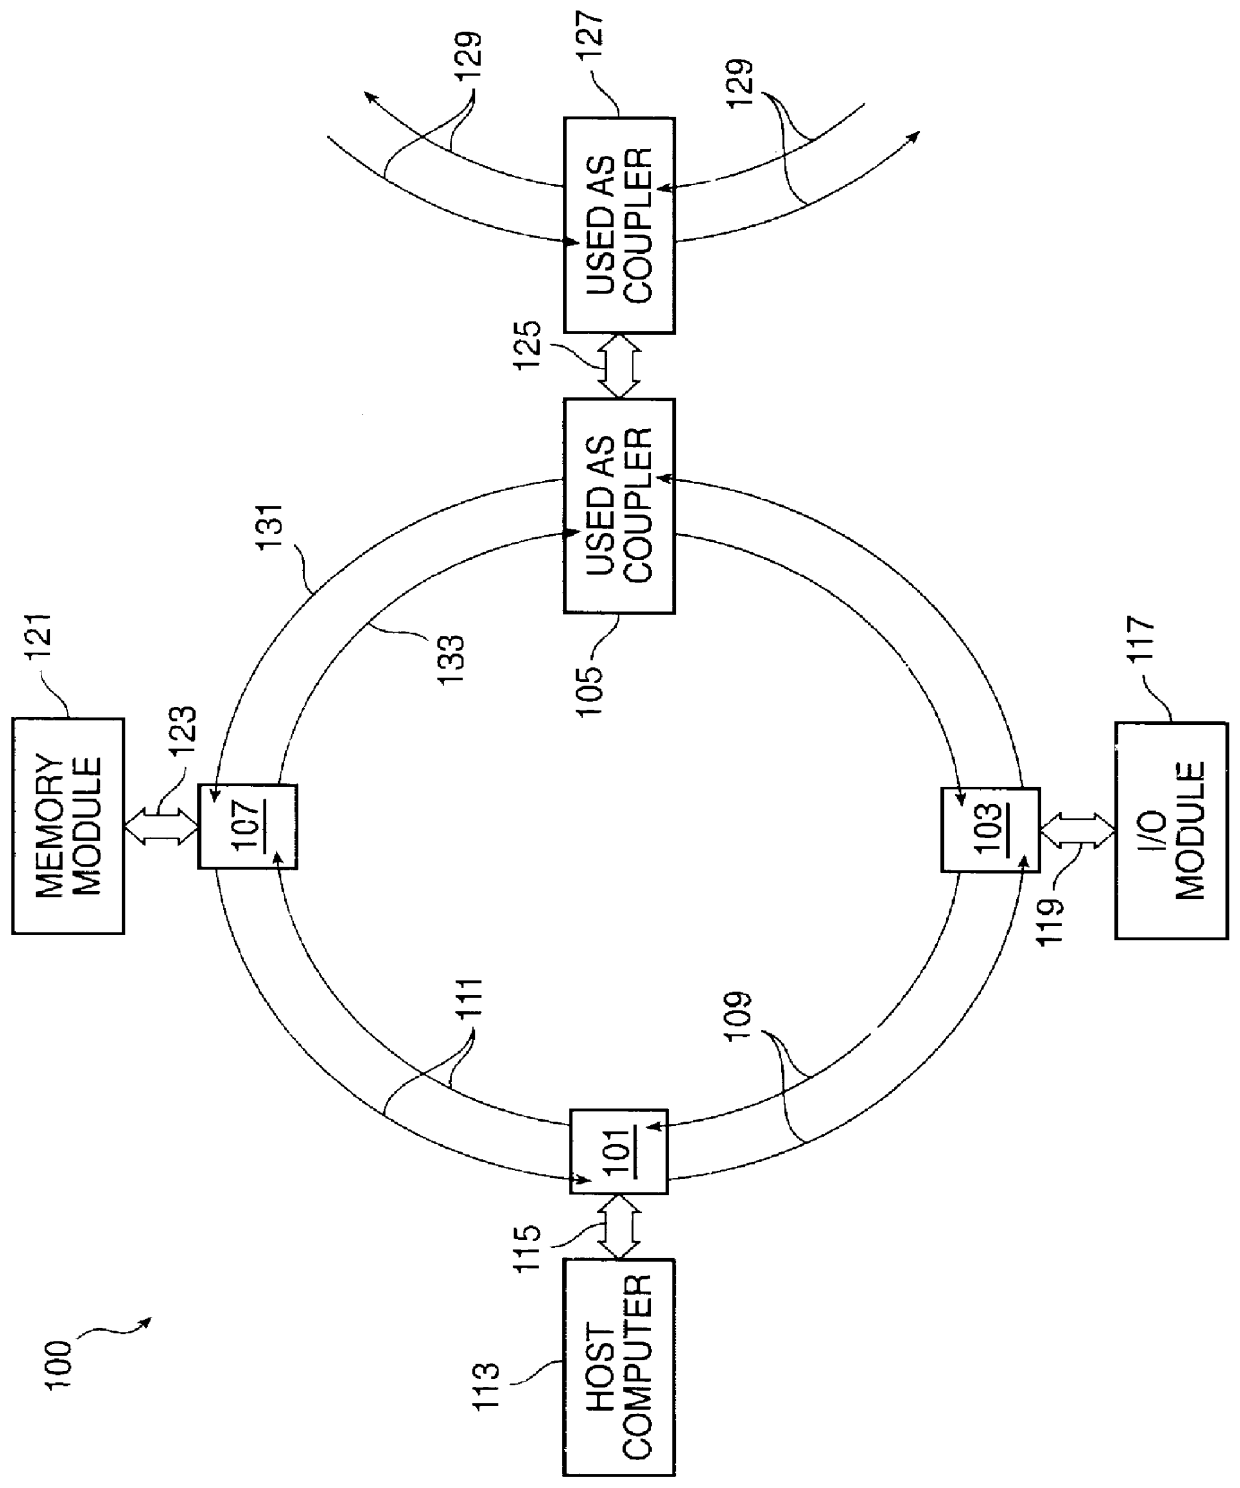 Method and apparatus for a fault tolerant, software transparent and high data integrity extension to a backplane bus or interconnect